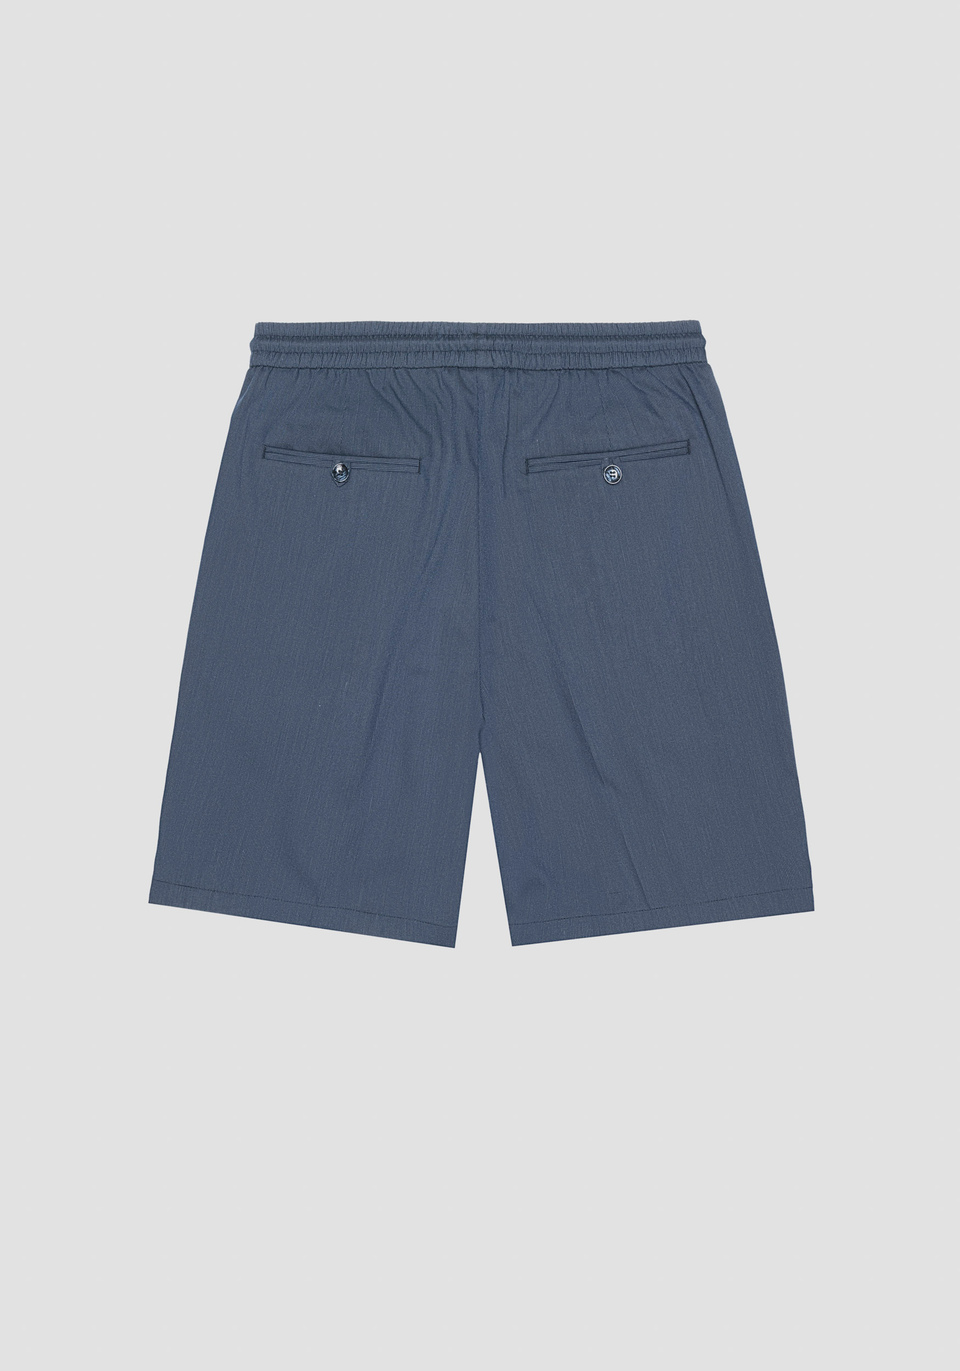 REGULAR FIT "NEIL" SHORTS WITH ELASTIC WAISTBAND AND DRAWSTRING - Antony Morato Online Shop